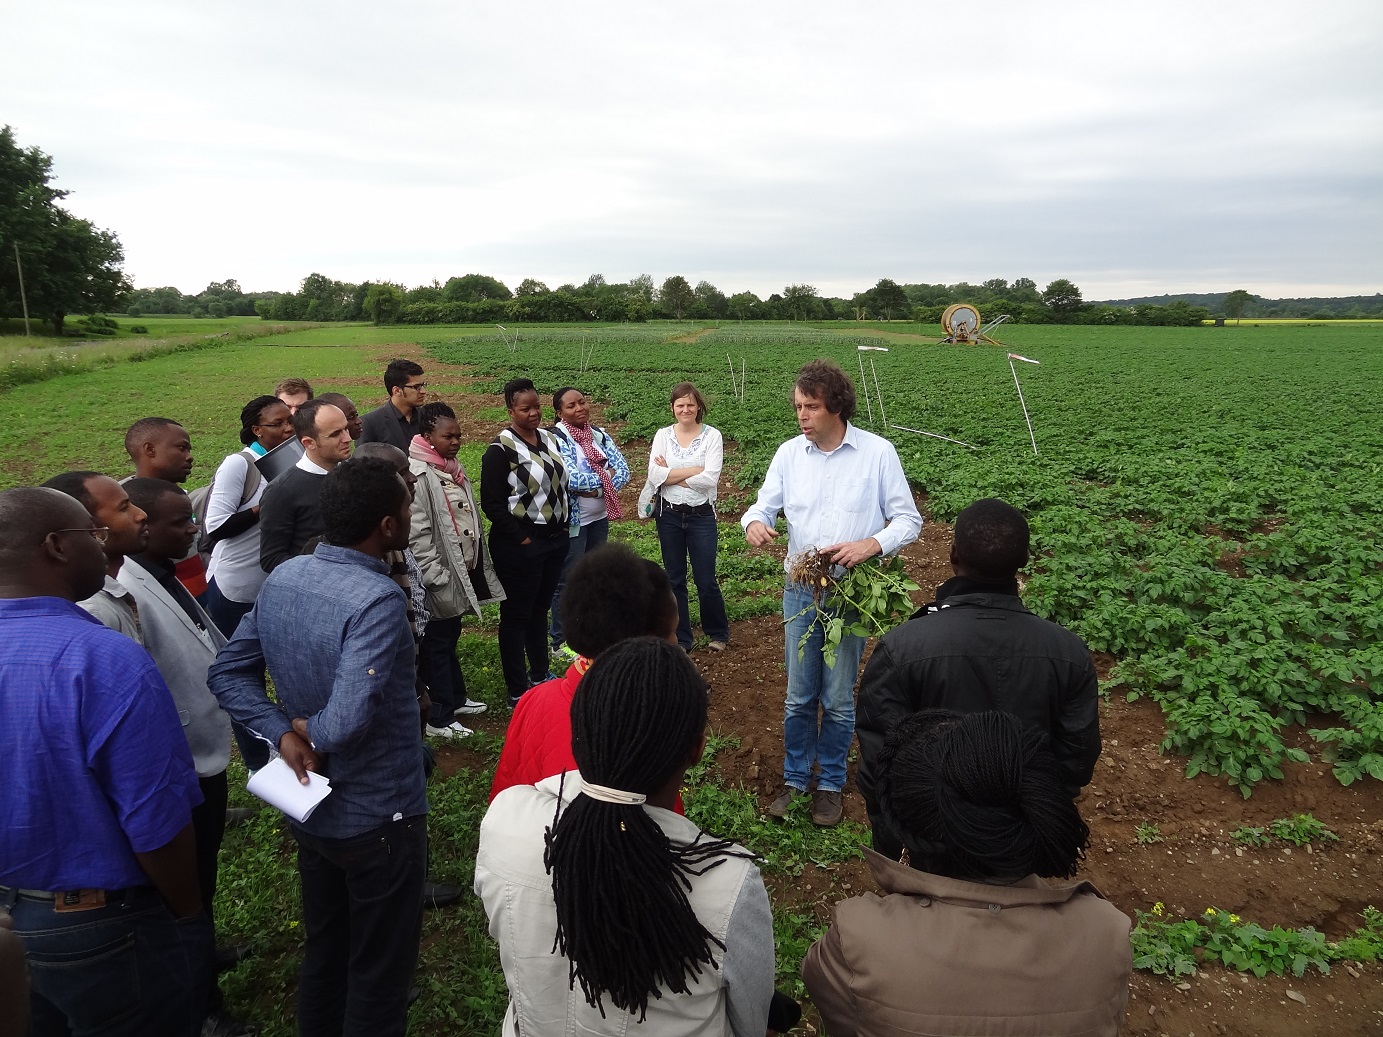 Successful RLC workshop on “Food security and sustainable agriculture: The future of smallholder farmers?”